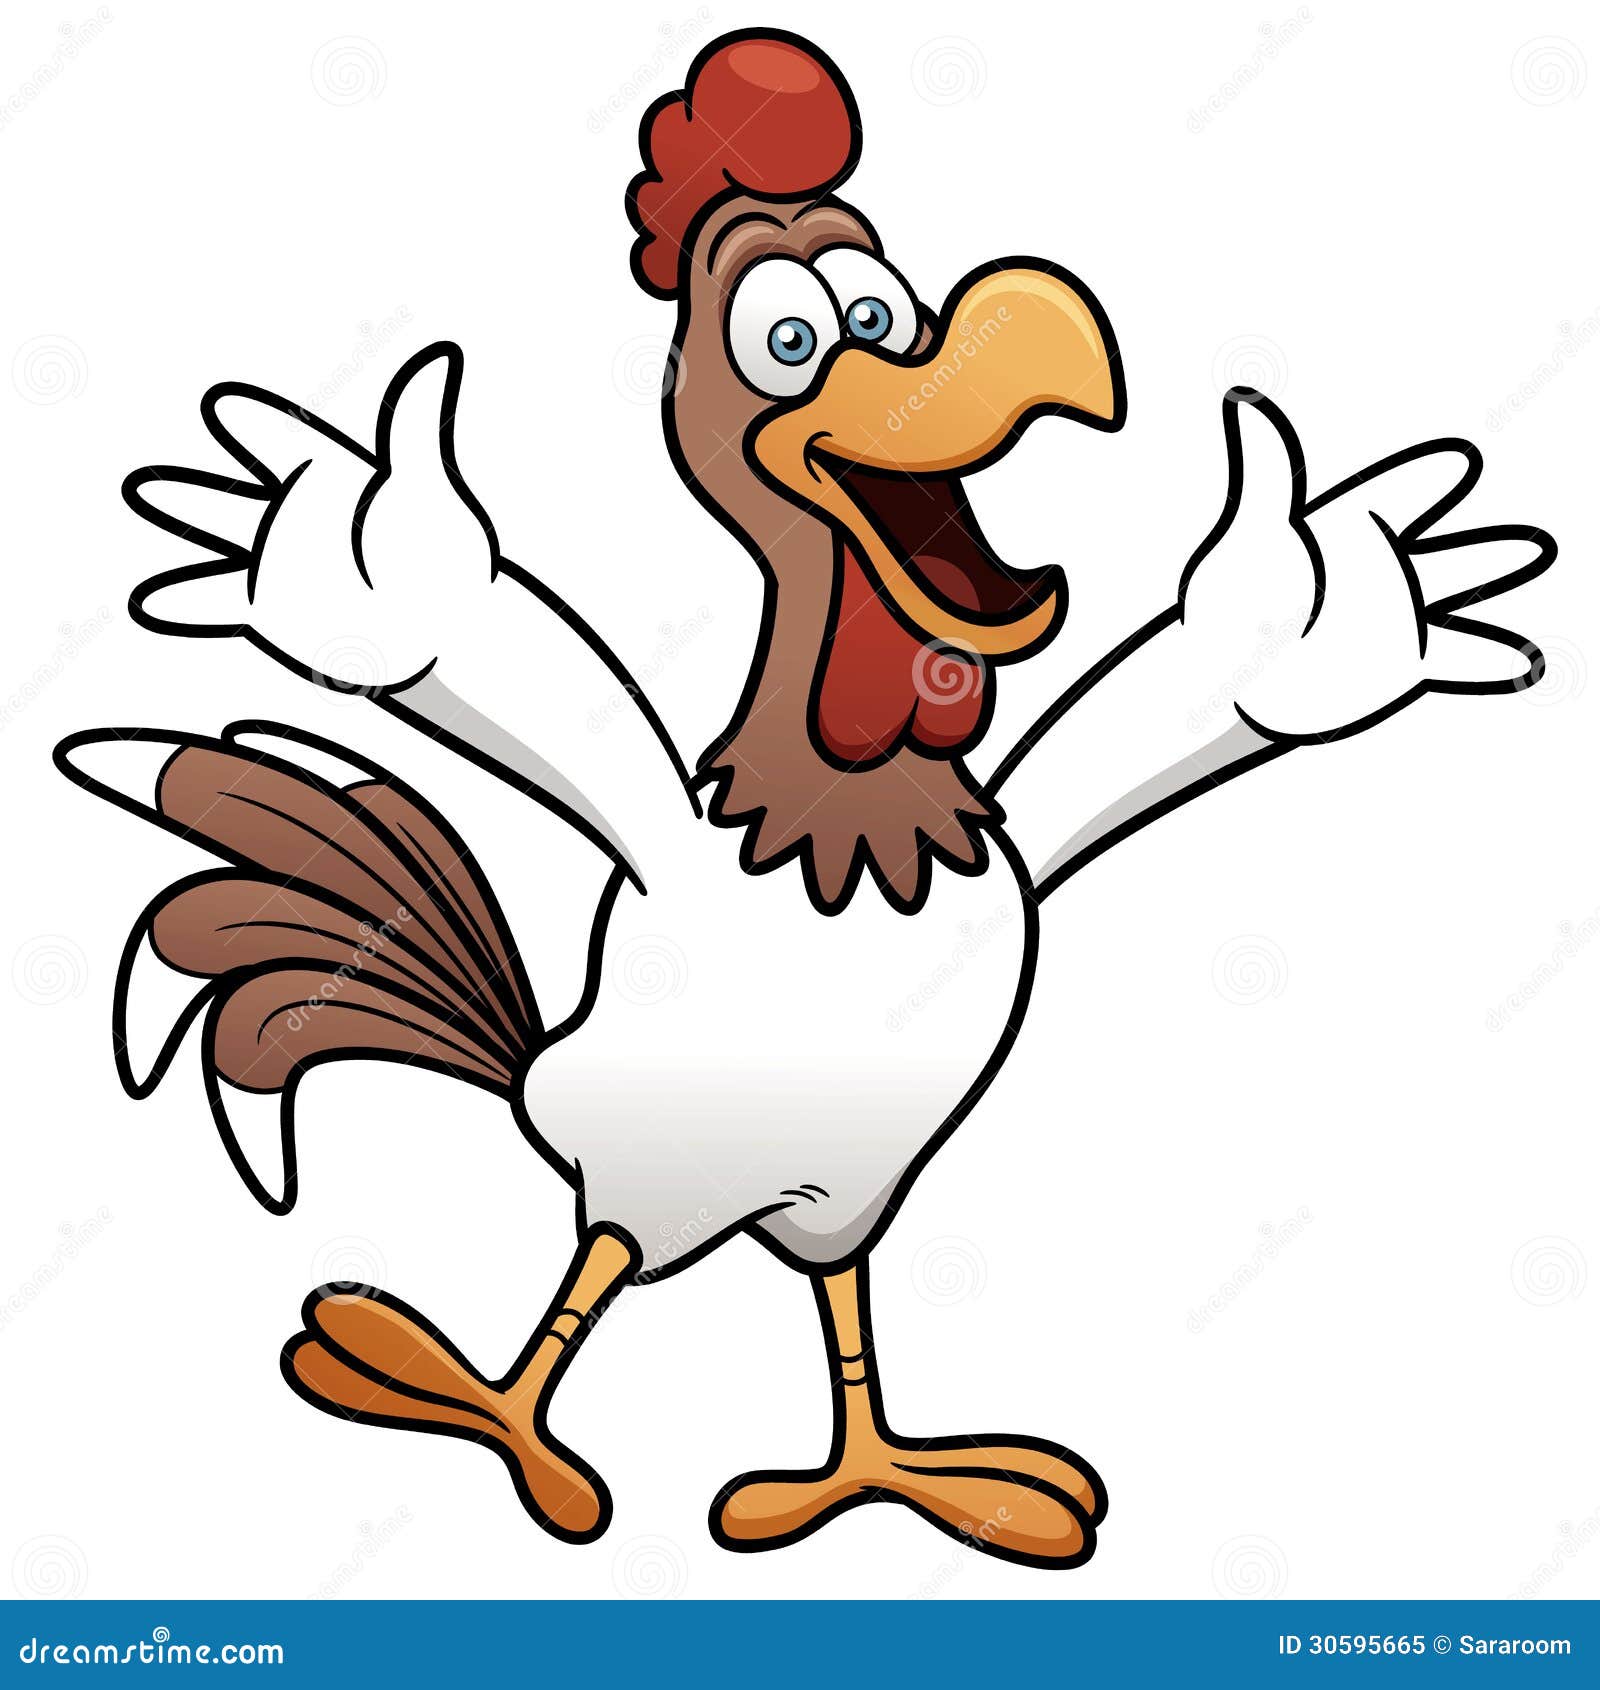 chicken clipart vector free download - photo #24